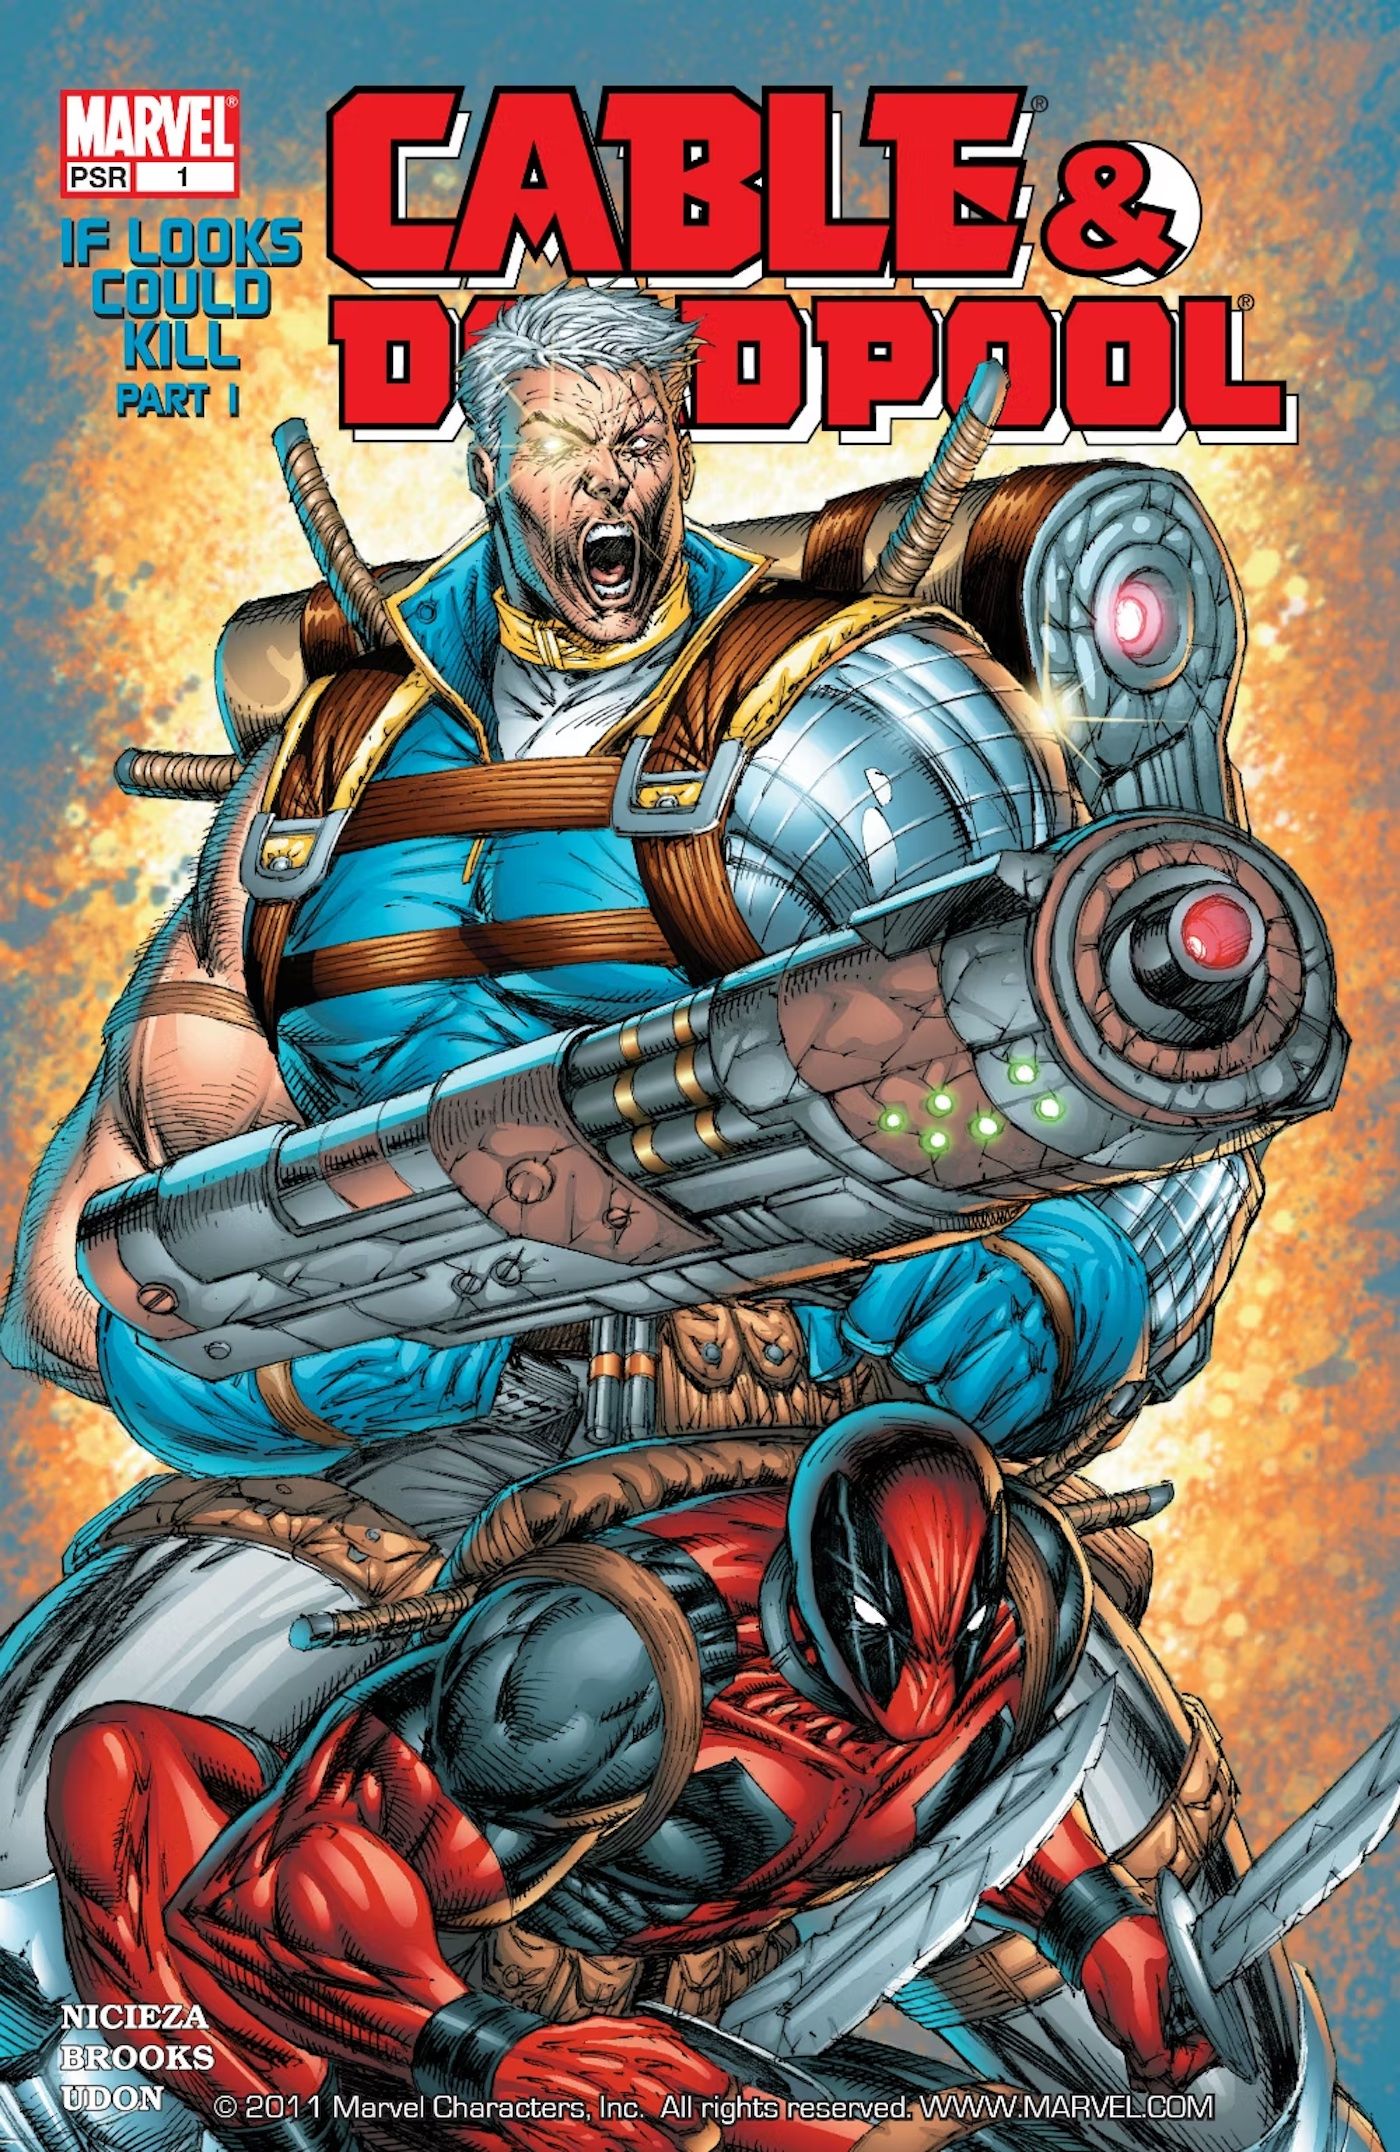 Cable & Deadpool looking enormous in Rob Liefeld's cover for their team-up series.